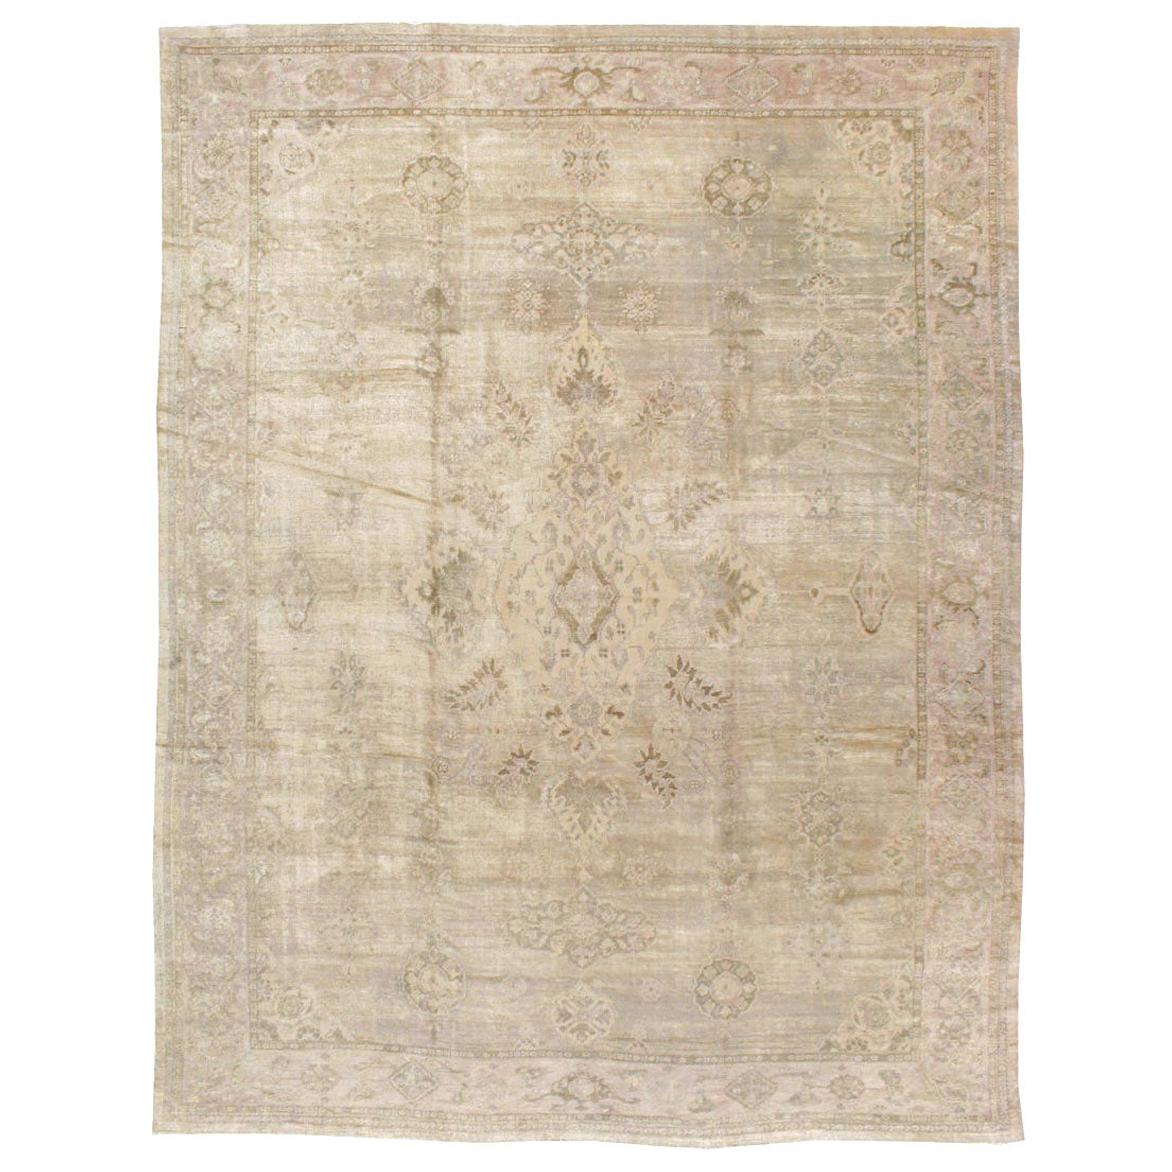 Early 20th Century Handmade Persian Sultanabad Room Size Carpet For Sale